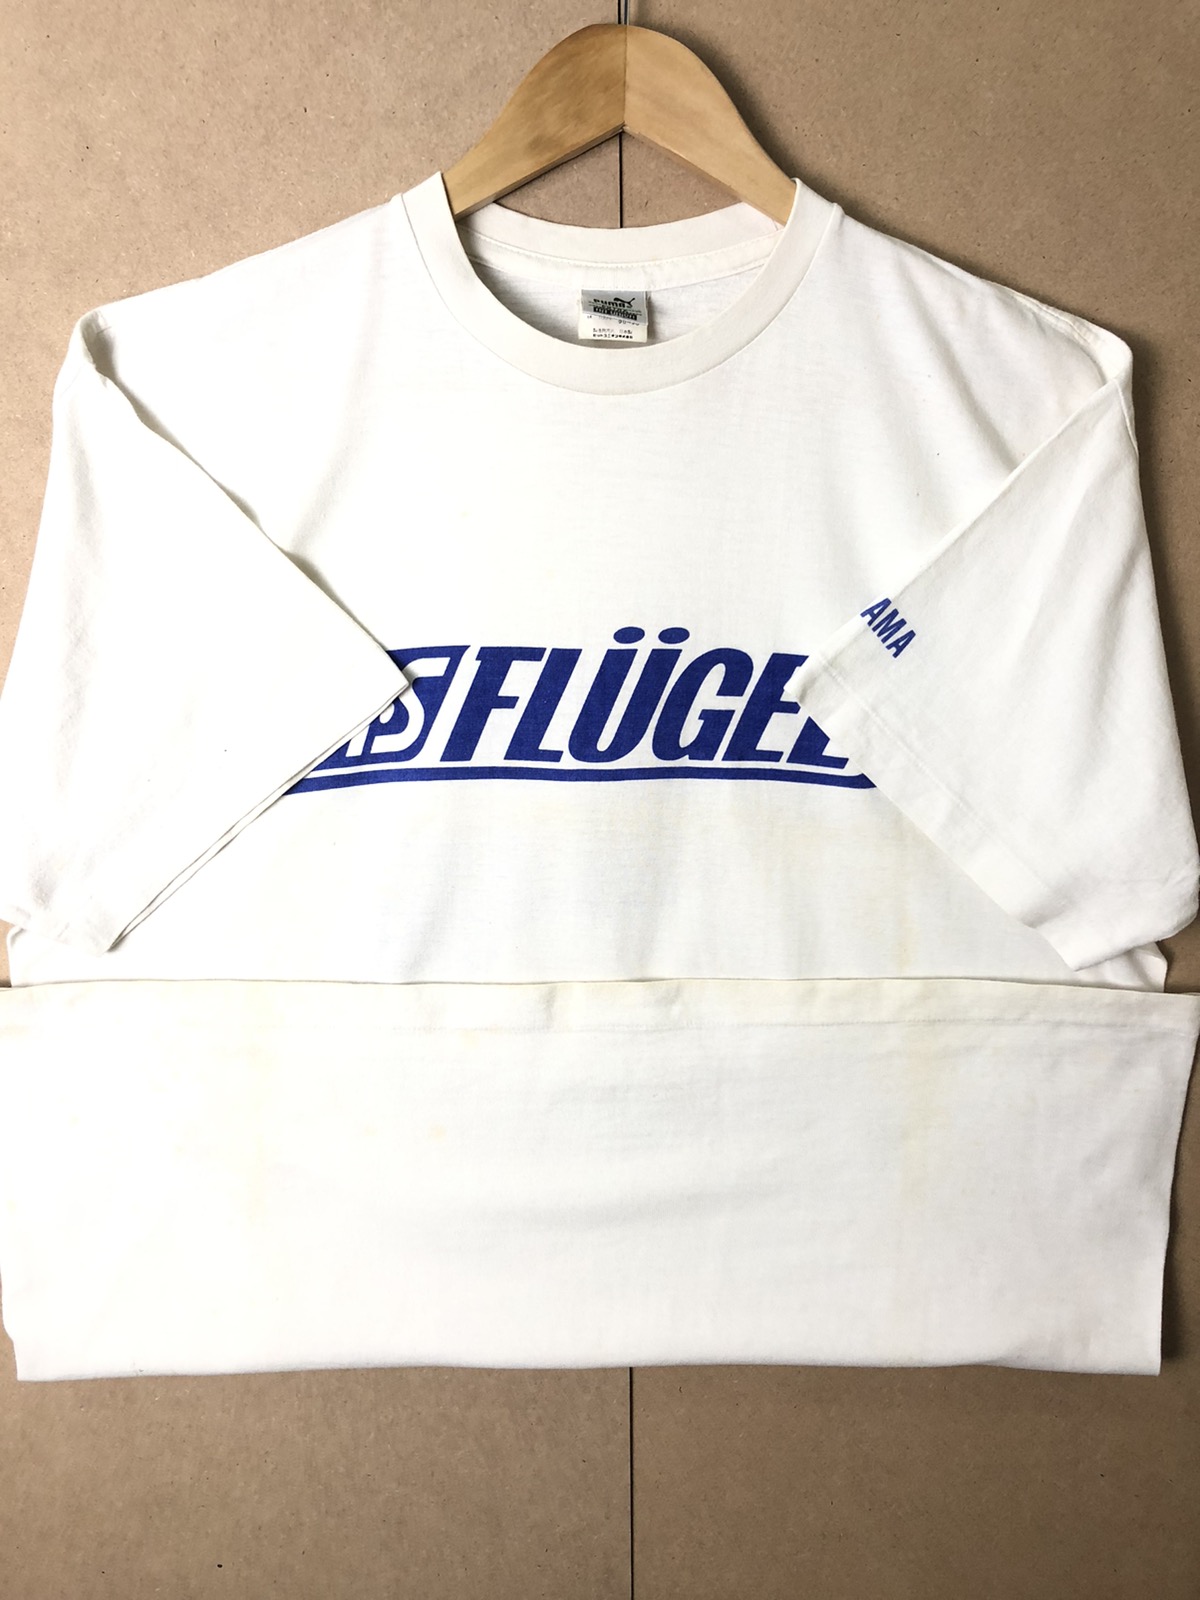 VTG 90s PUMA SHIRT AS FLUGELS WITH SPELL OUT BIG LOGO - 7